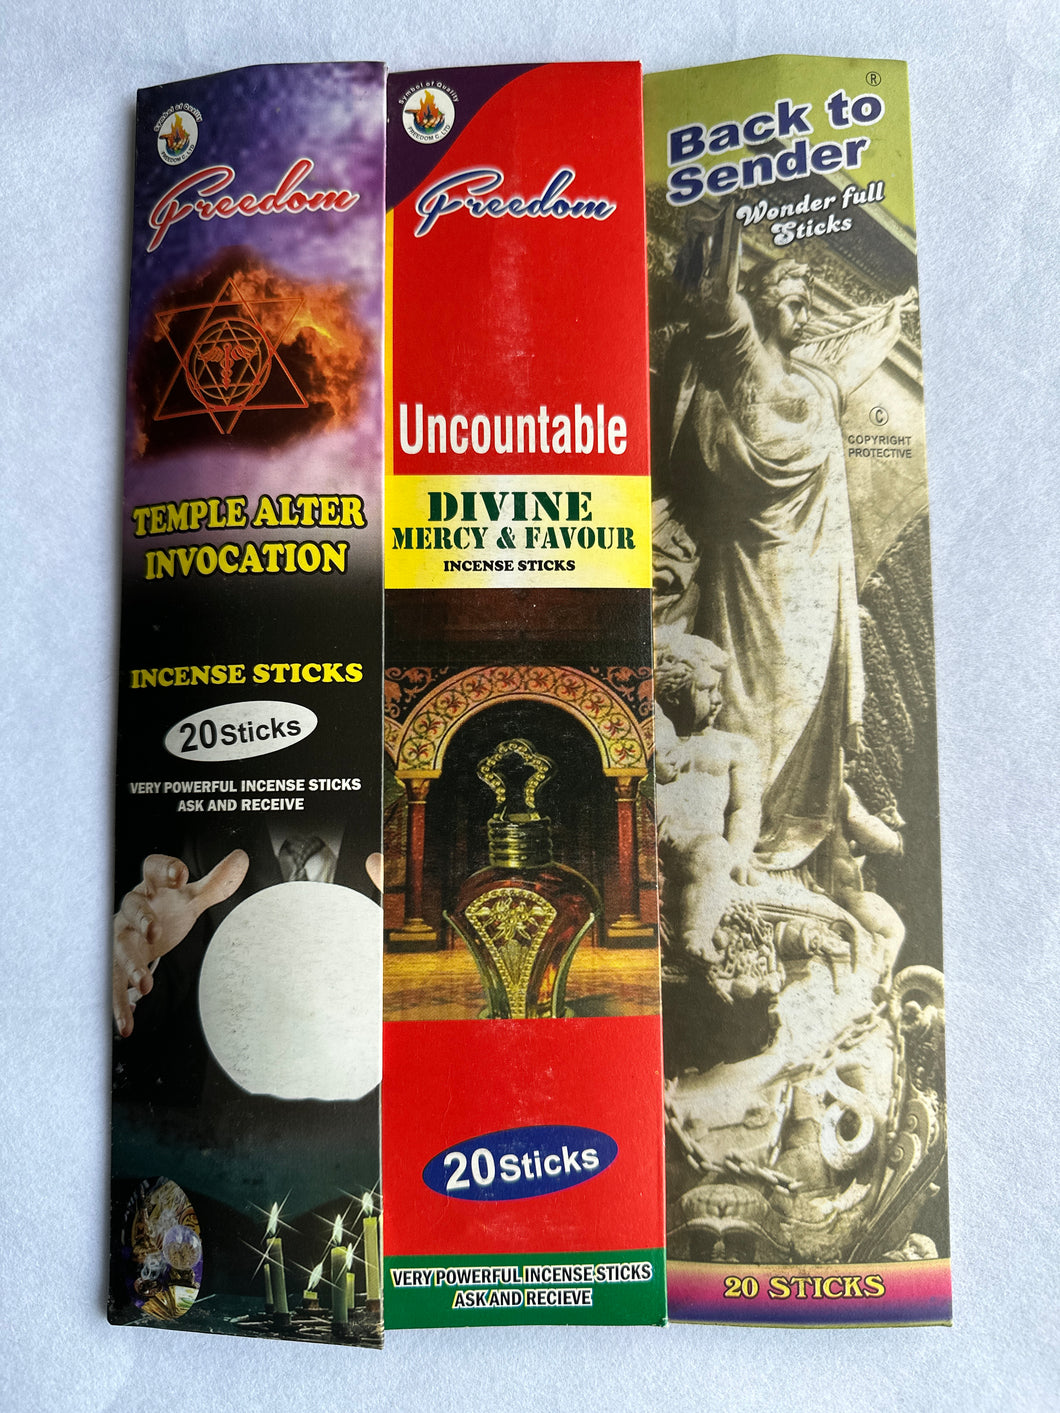 20 Sticks Incense Per Pack Temple Alter Invocation, Uncountable Divine Mercy & Favour, Back To Sender